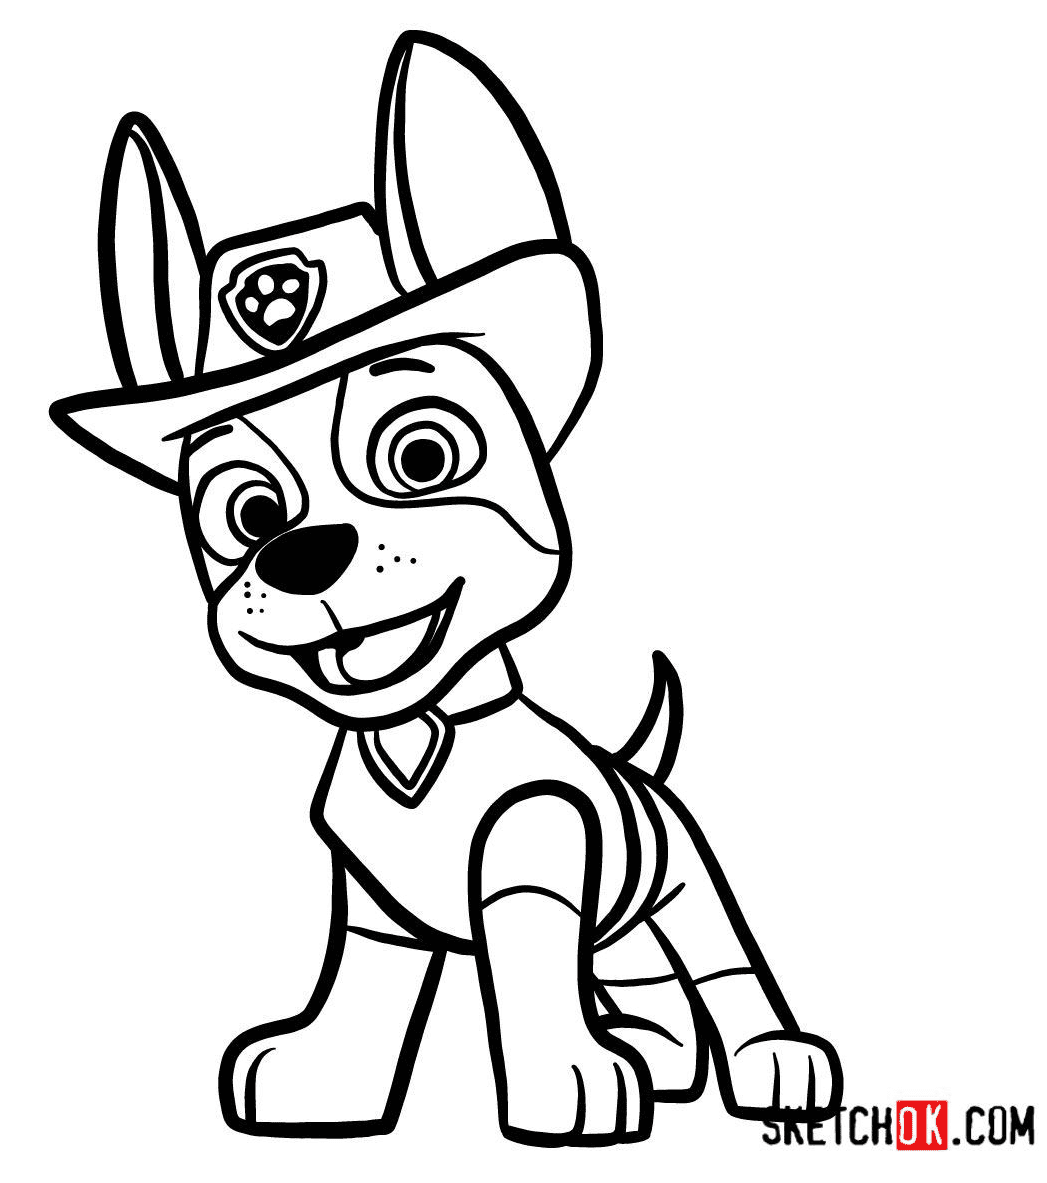 Tracker in Paw Patrol Coloring Pages